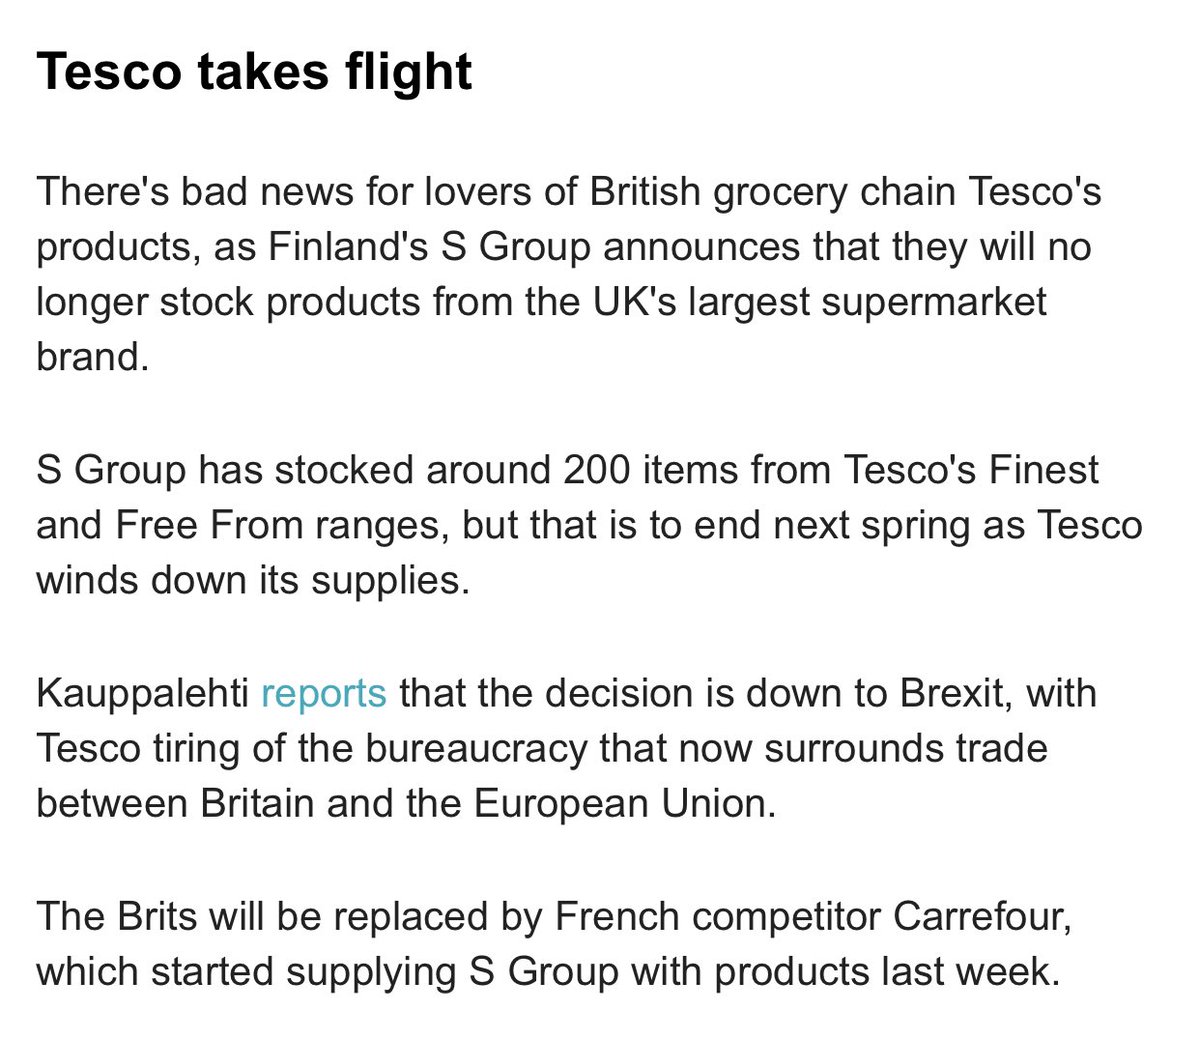 Another Brexit benefit…..
#brexit #BrexitDisaster #brexitexports #tesco #BrexitHasFailed #BrexitBritain #britishexports #sunnyuplands